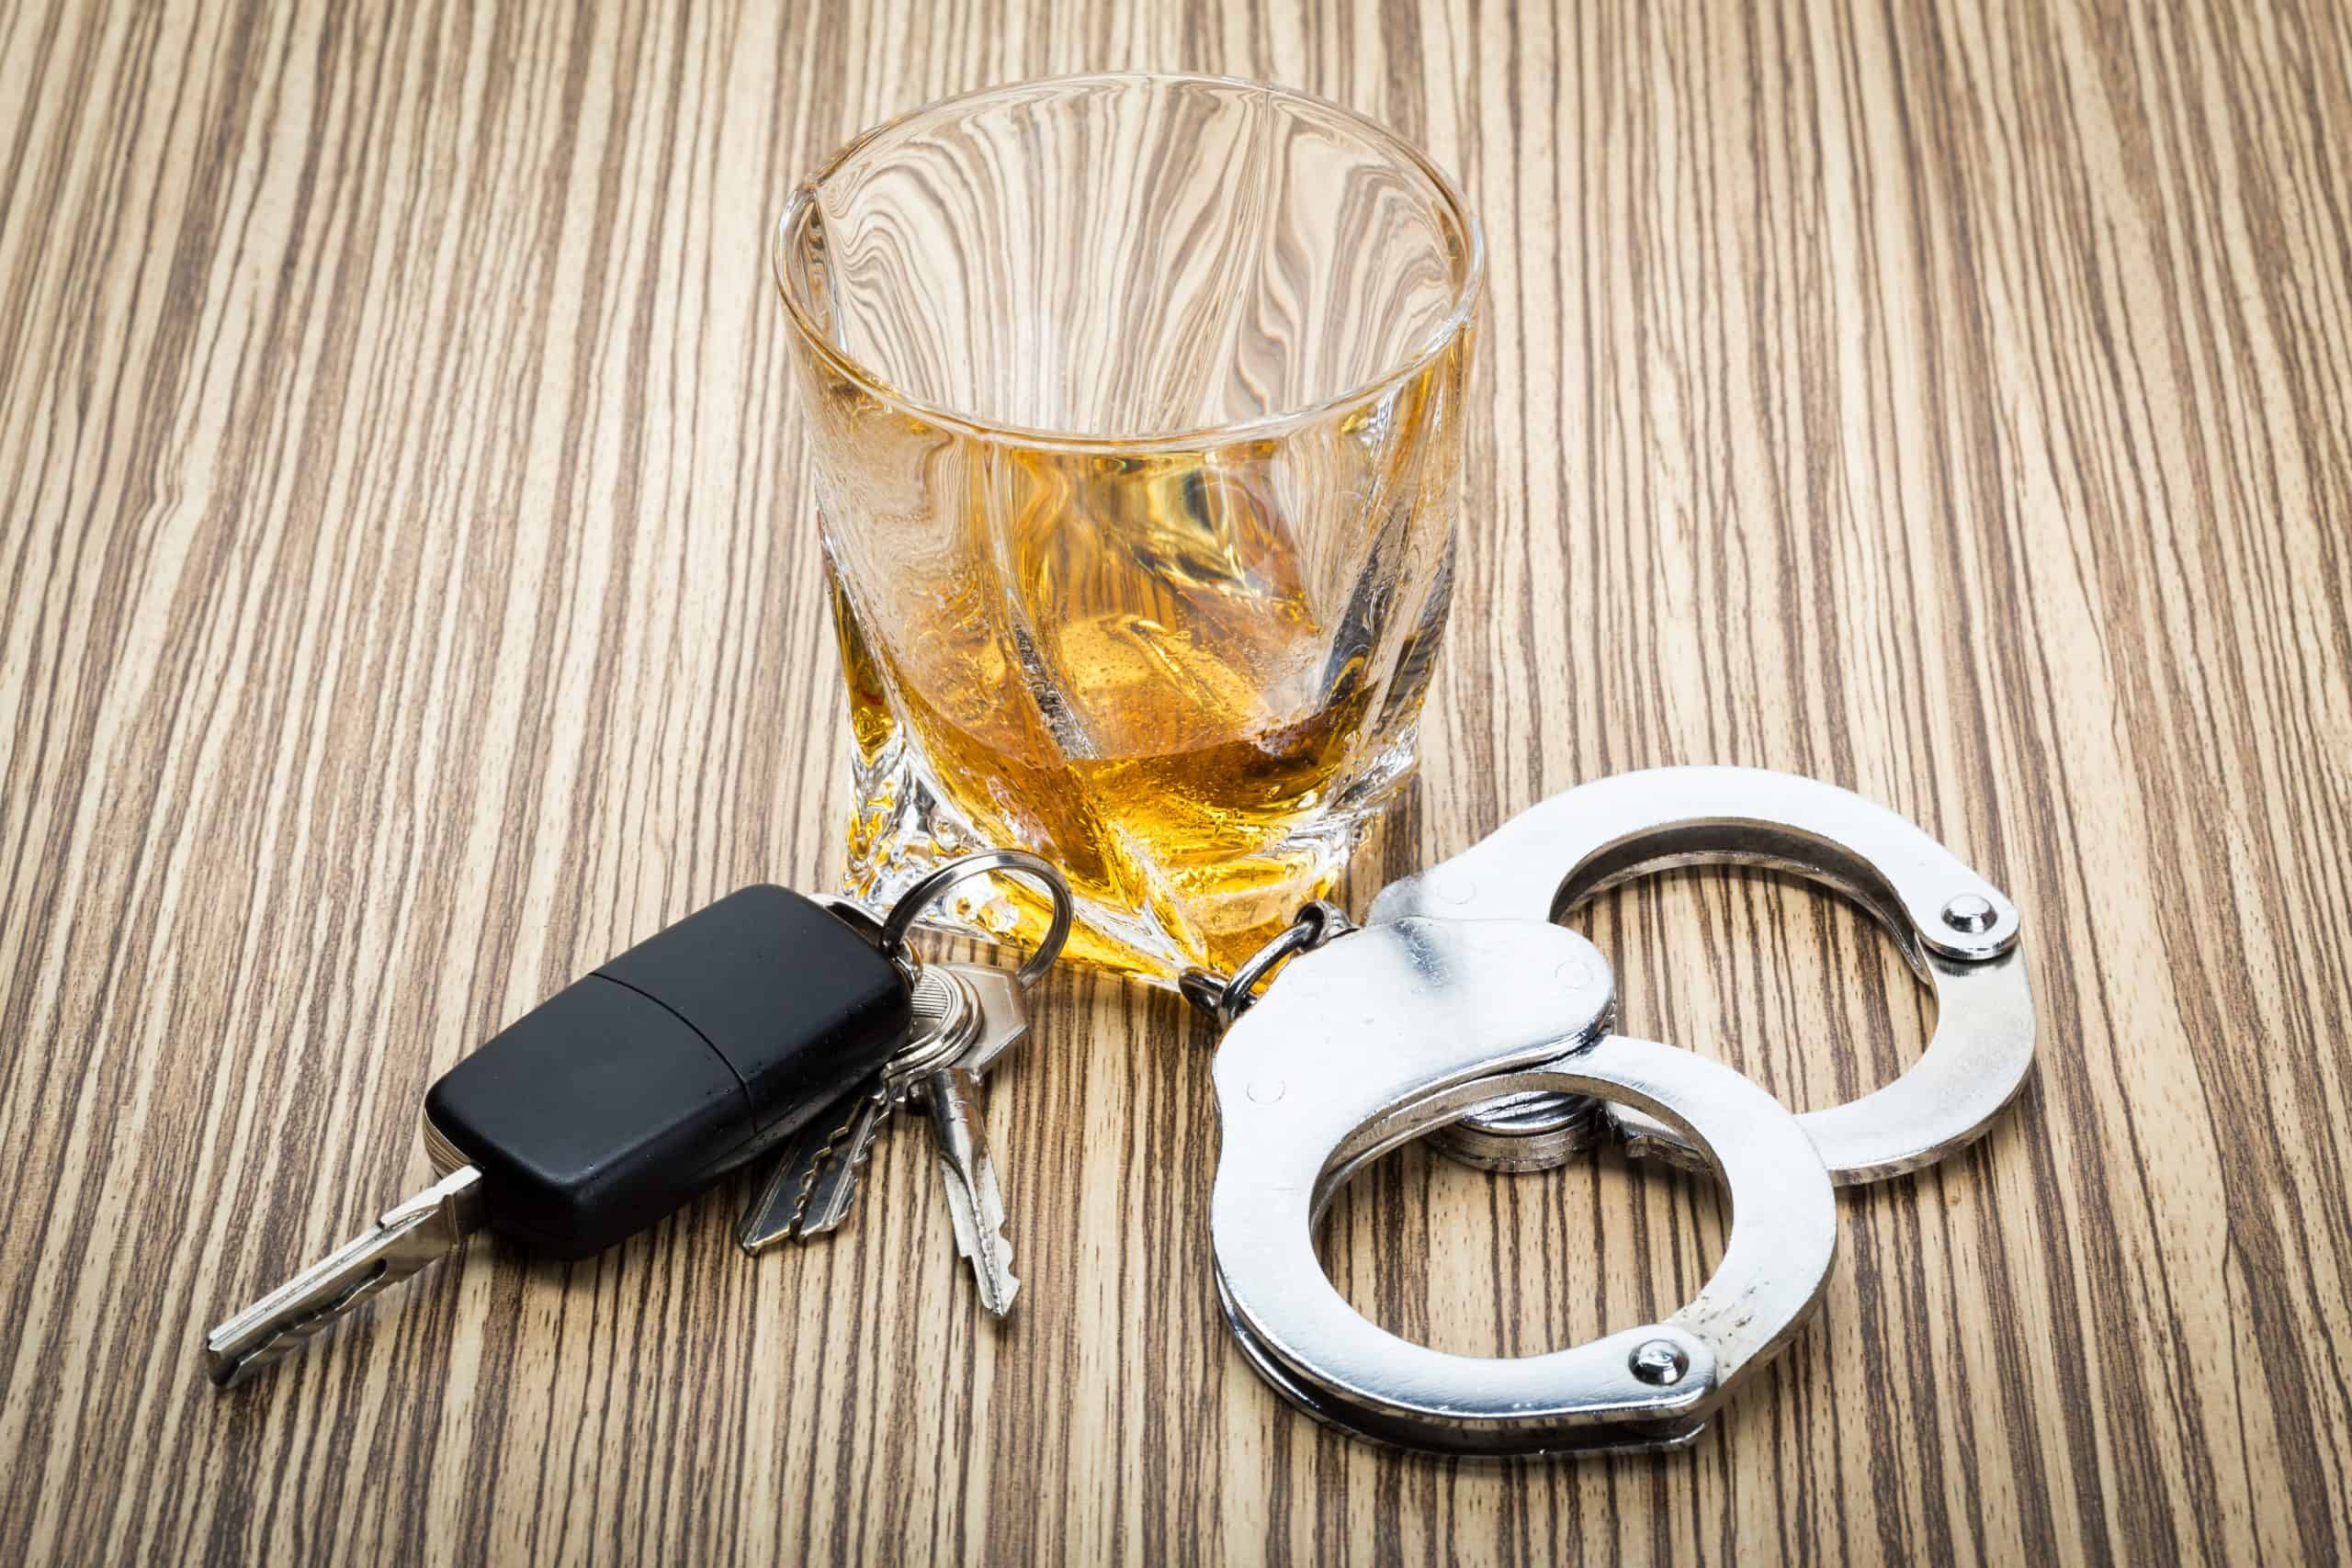 Penalties for a DWI or DUI in Texas